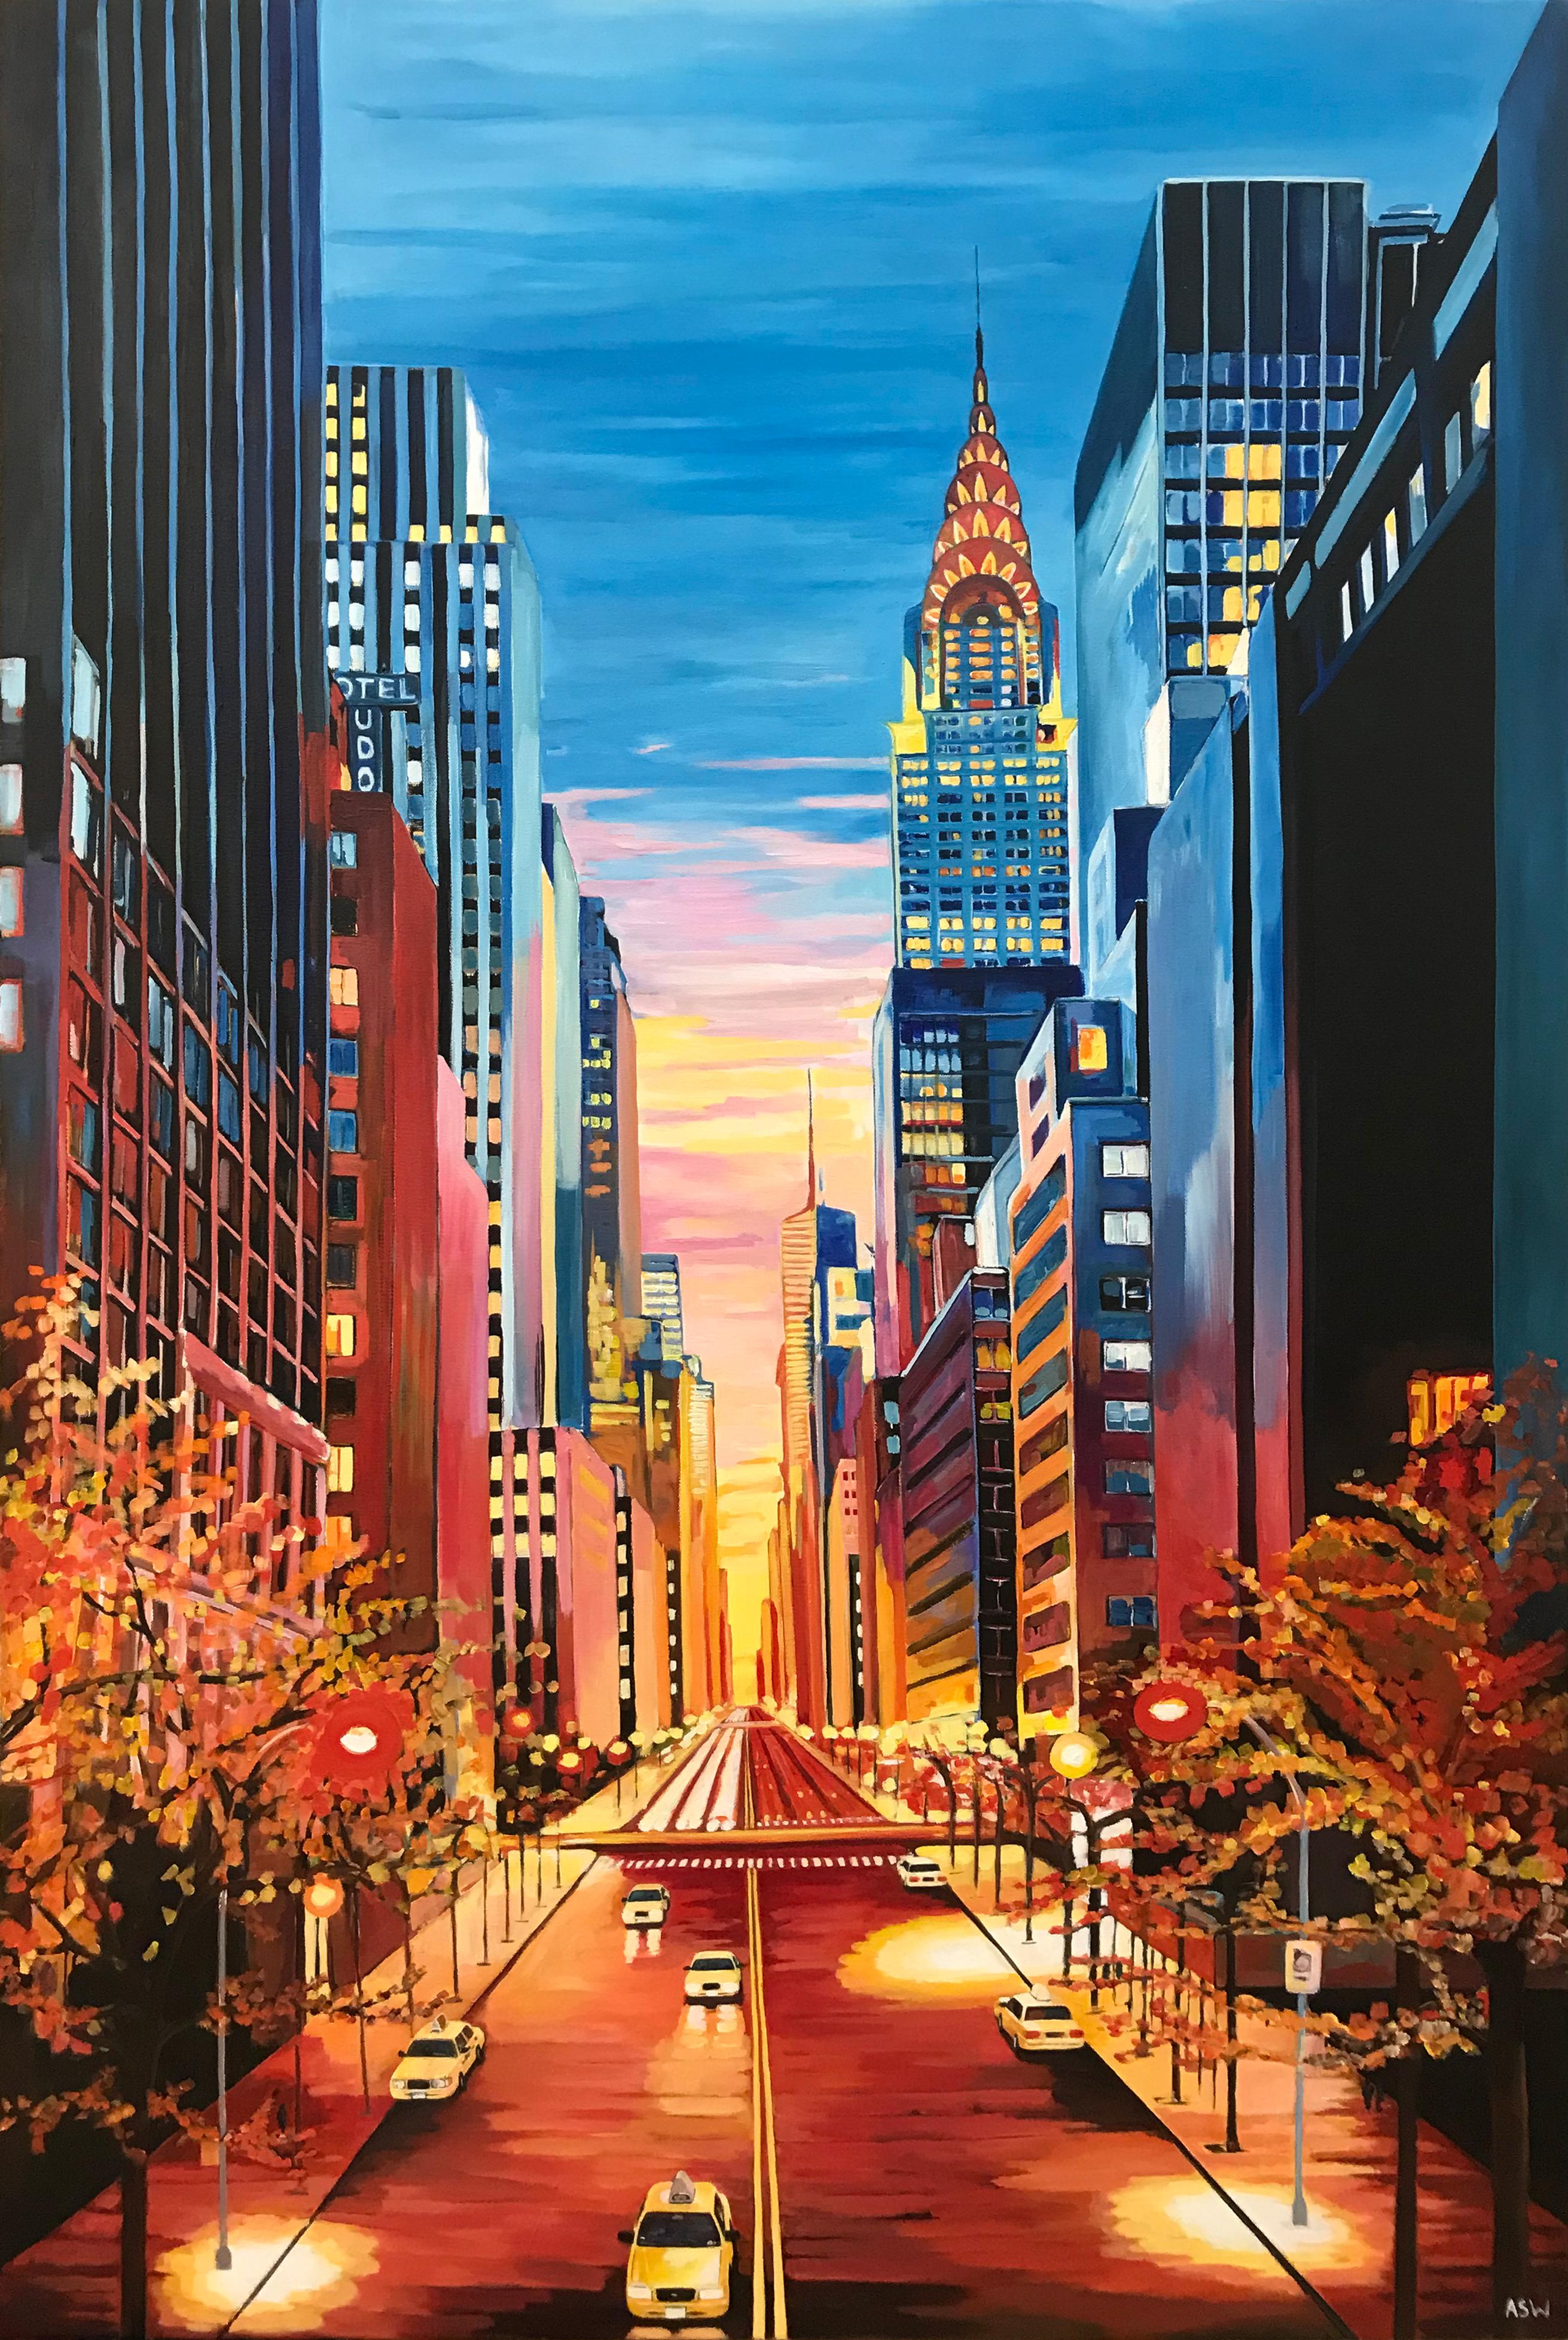 Angela Wakefield Landscape Painting - Large Painting of Chrysler Building New York City NYC by Leading British Artist